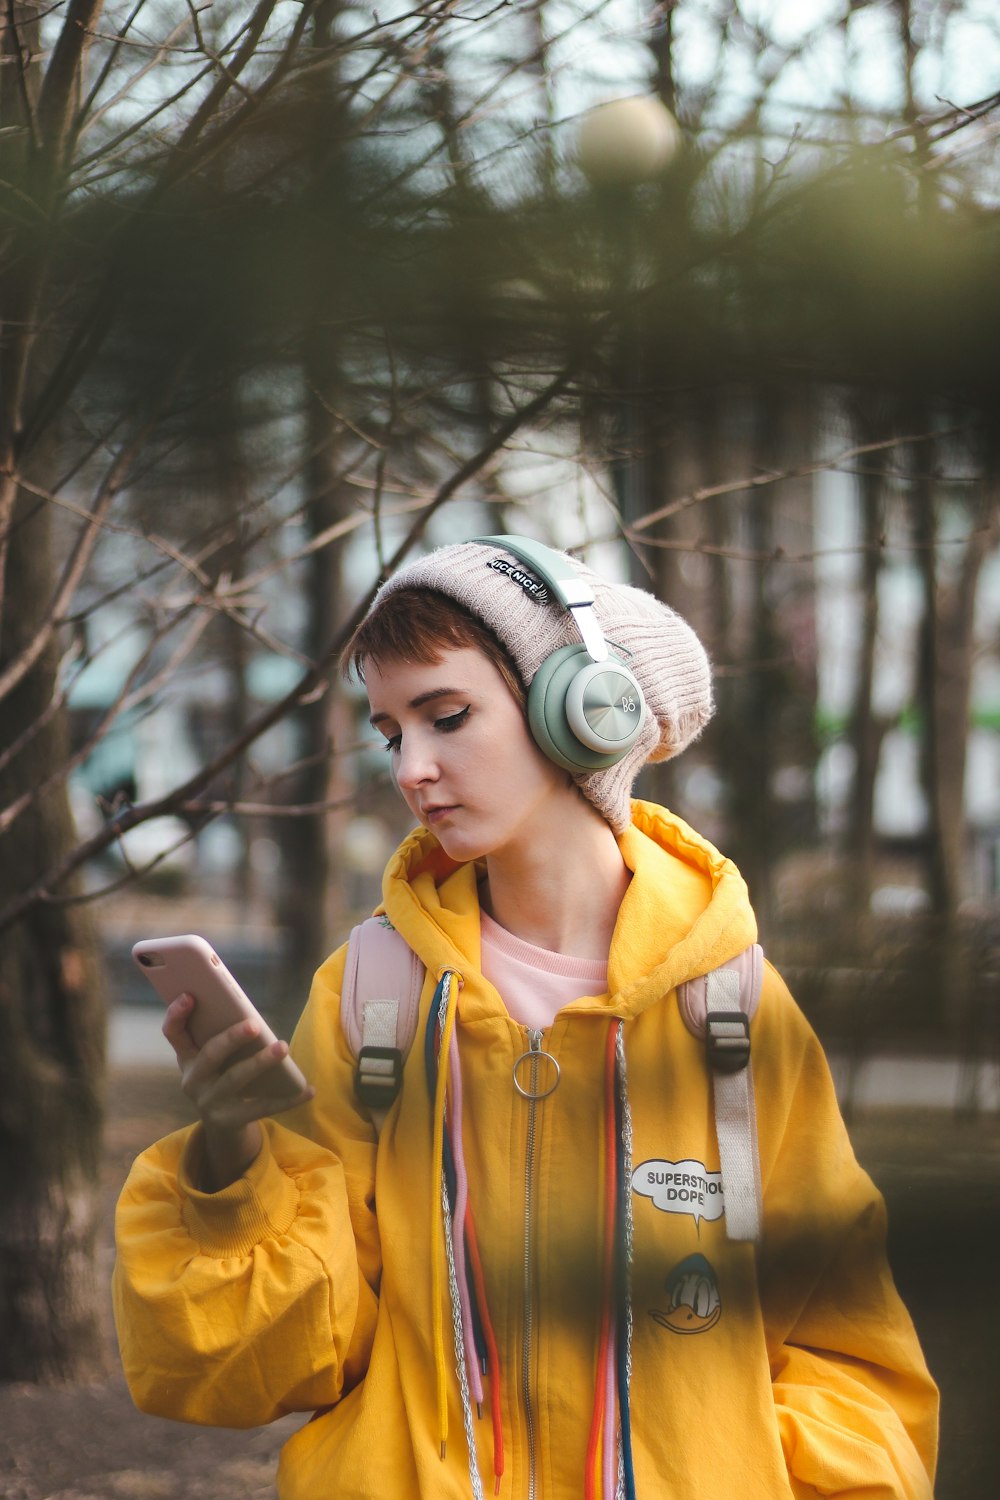 girl wears knit cap and yellow jacket holding smartphone